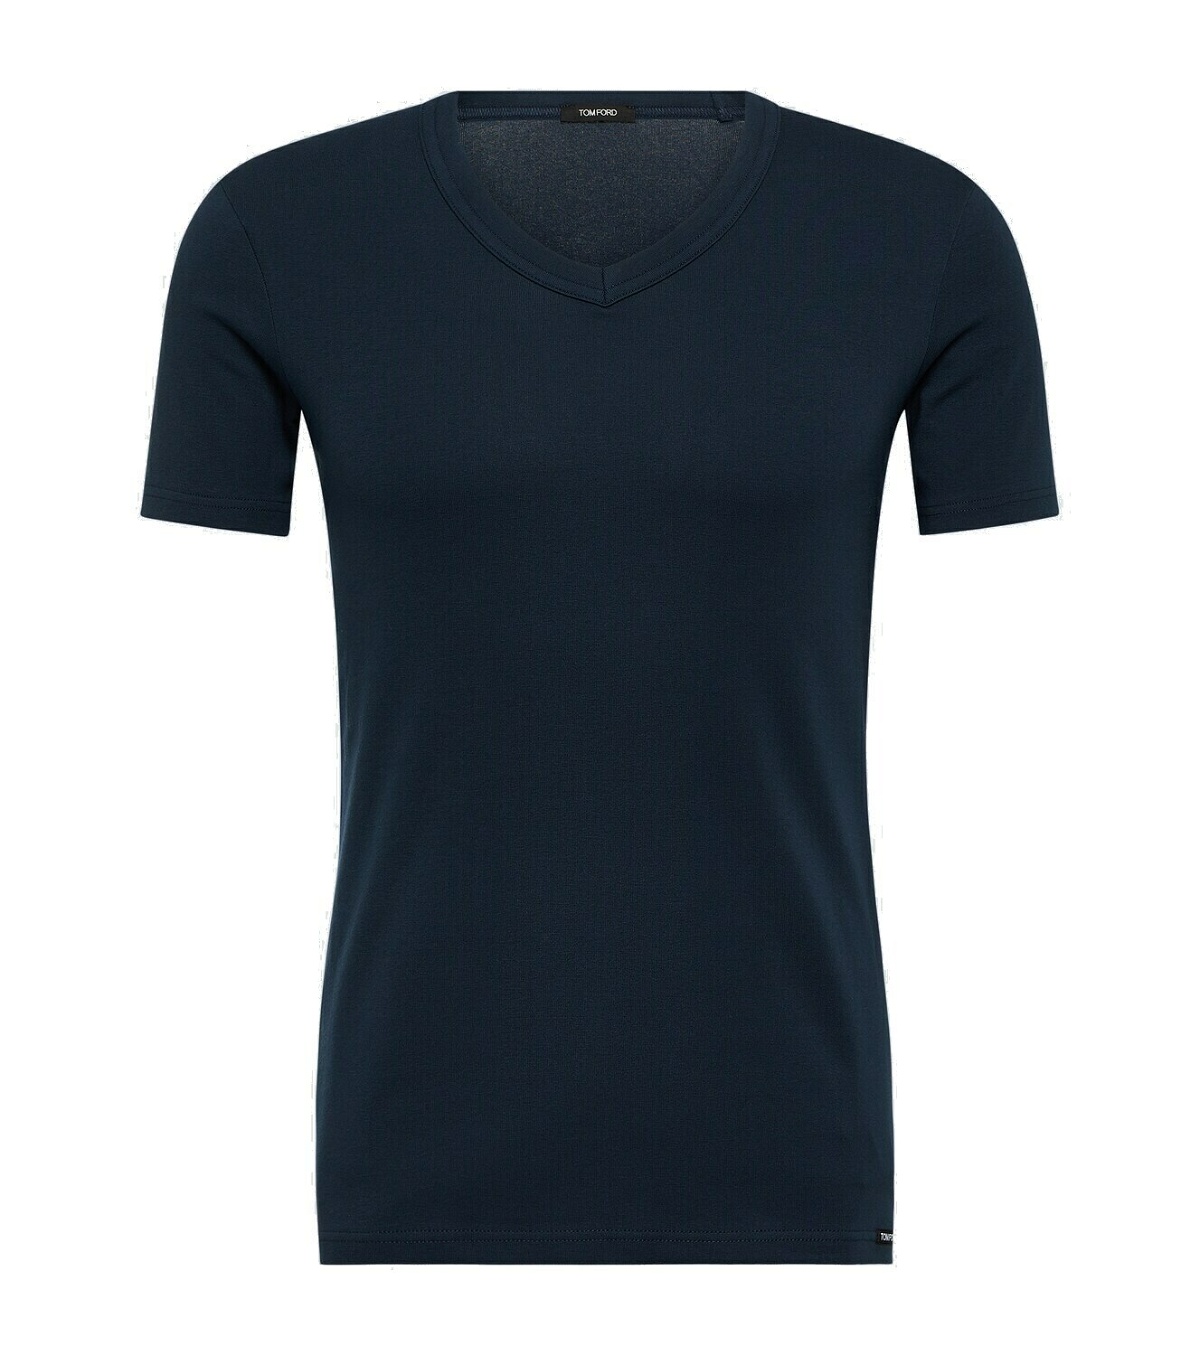 Tom Ford Cotton-blend jersey T-shirt TOM FORD